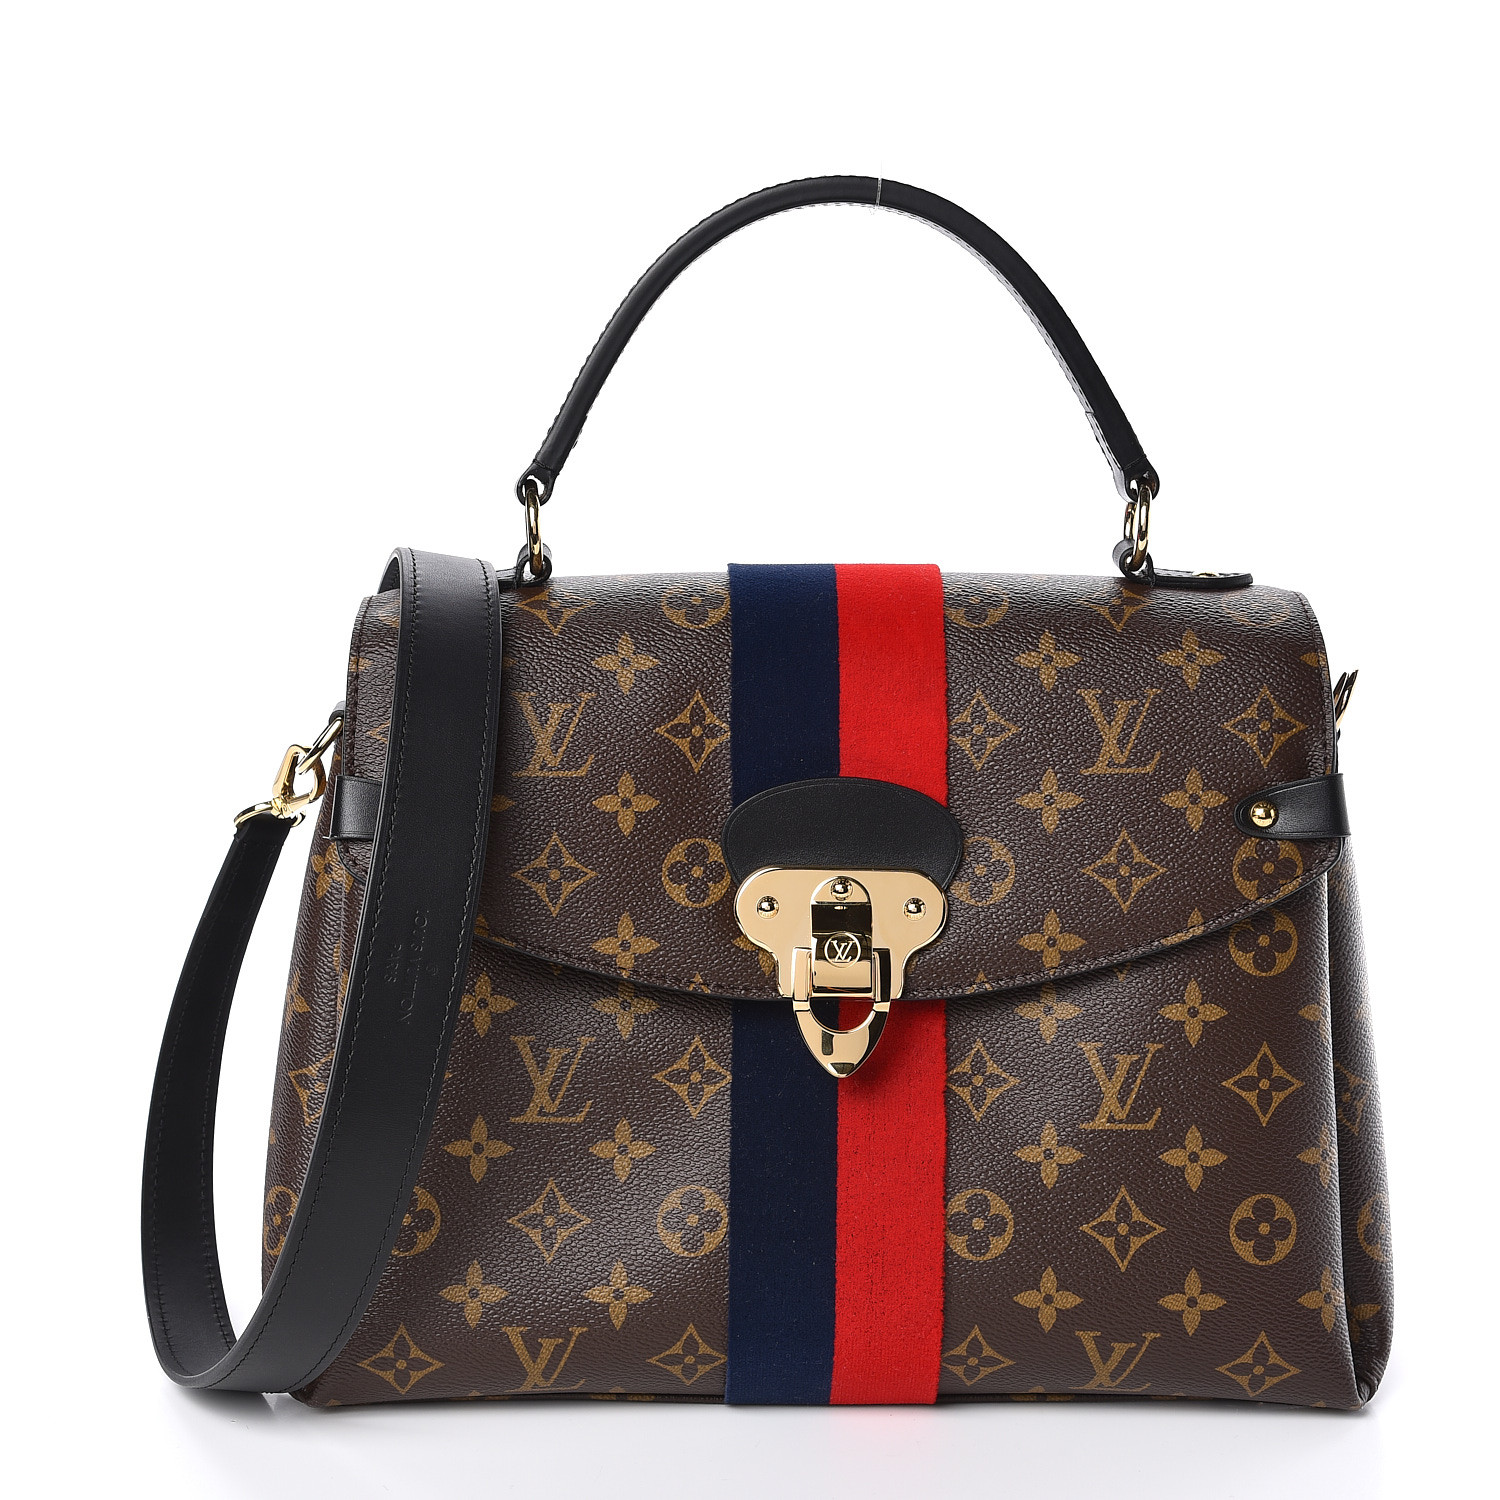 Say Wha? Louis Vuitton and Karl Lagerfeld Get Punchy